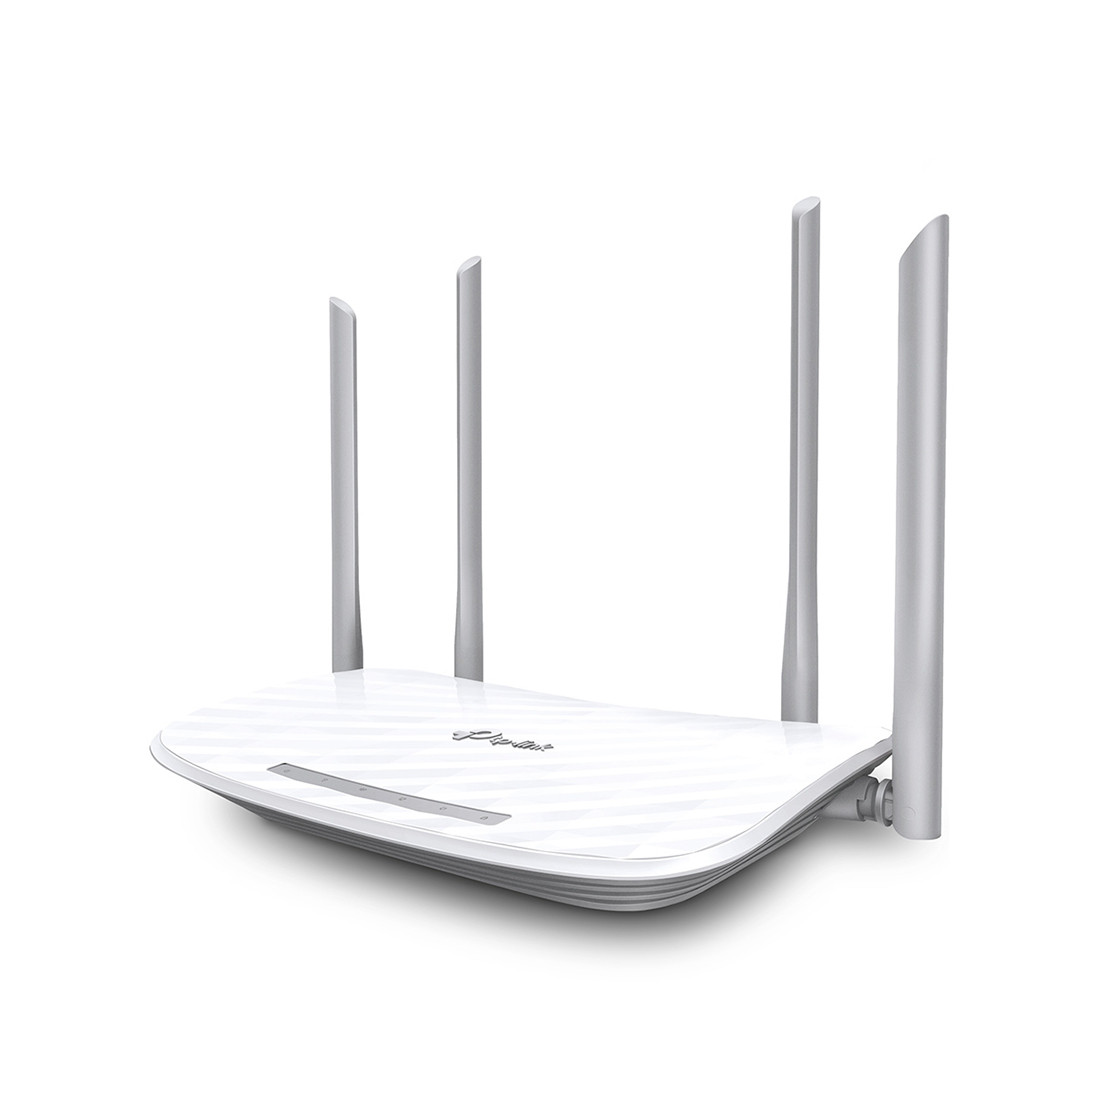 Маршрутизатор TP-Link Archer A5 - фото 1 - id-p112396920